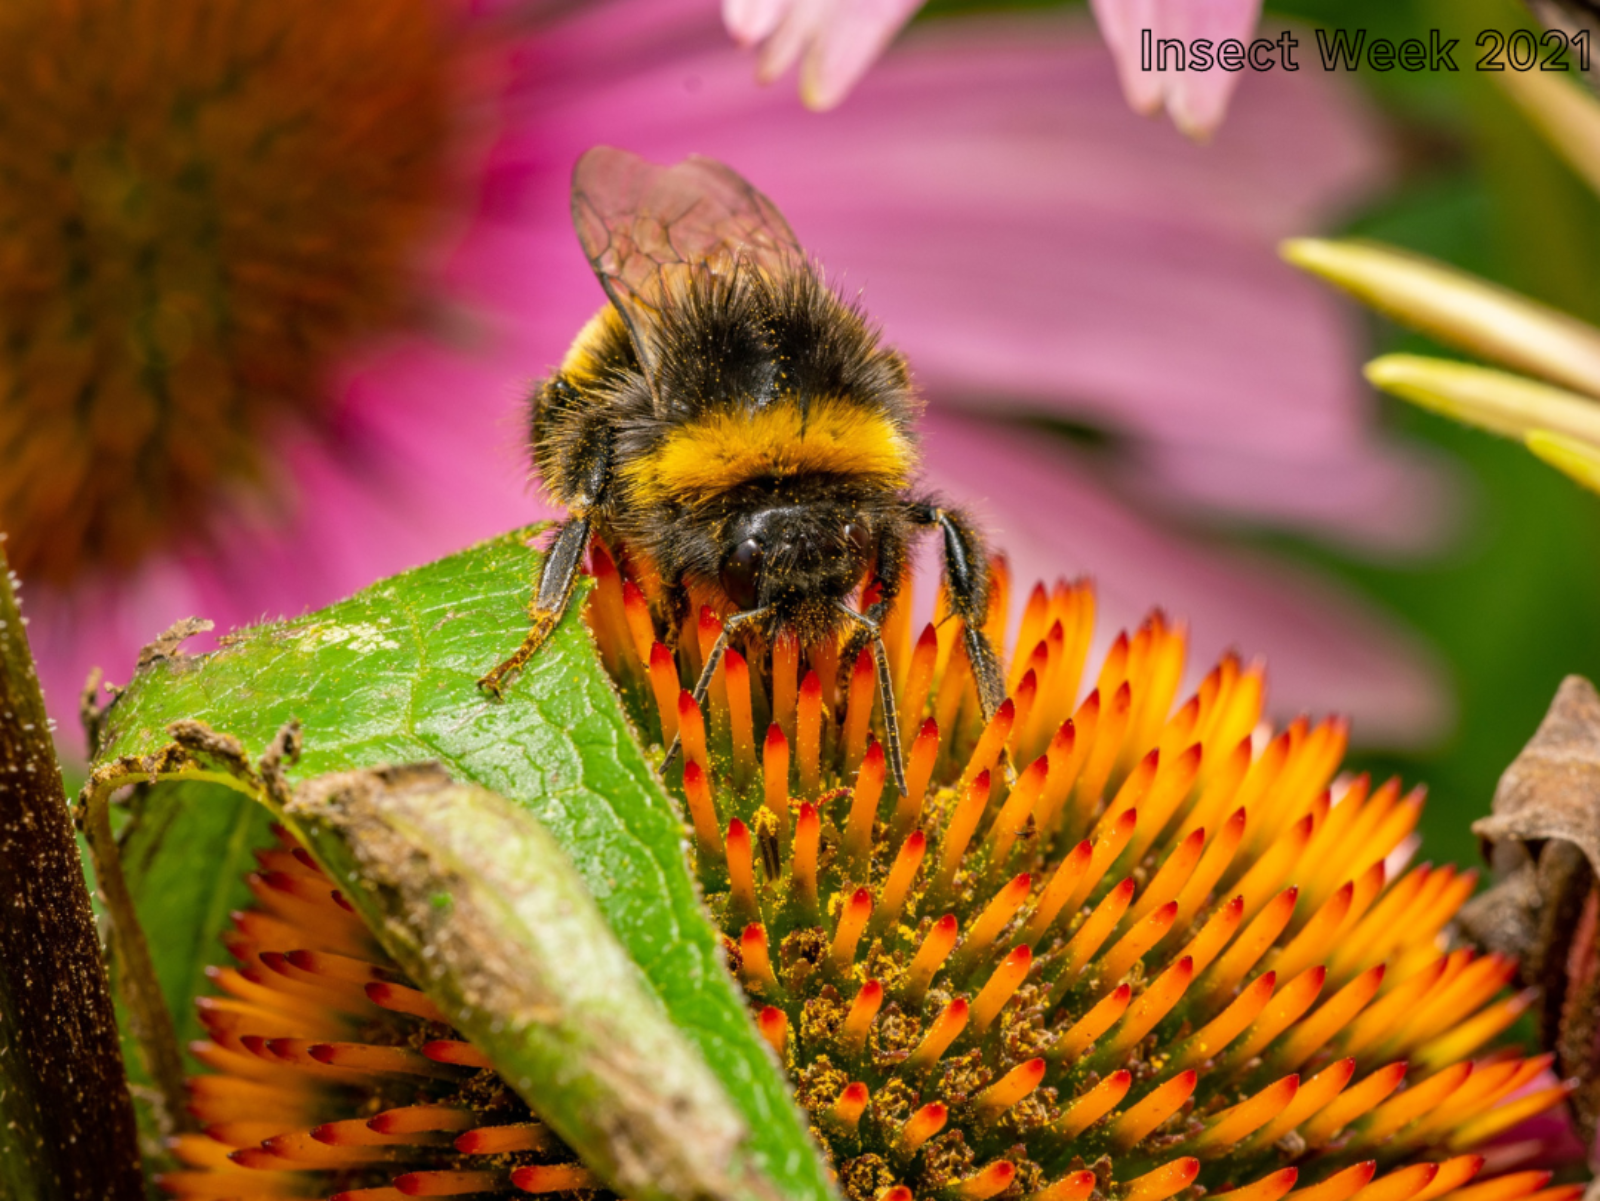 Bumblebee surrounded by flowers, photo by Jack Gardiner (Insect Week Under 18 competition 2021)